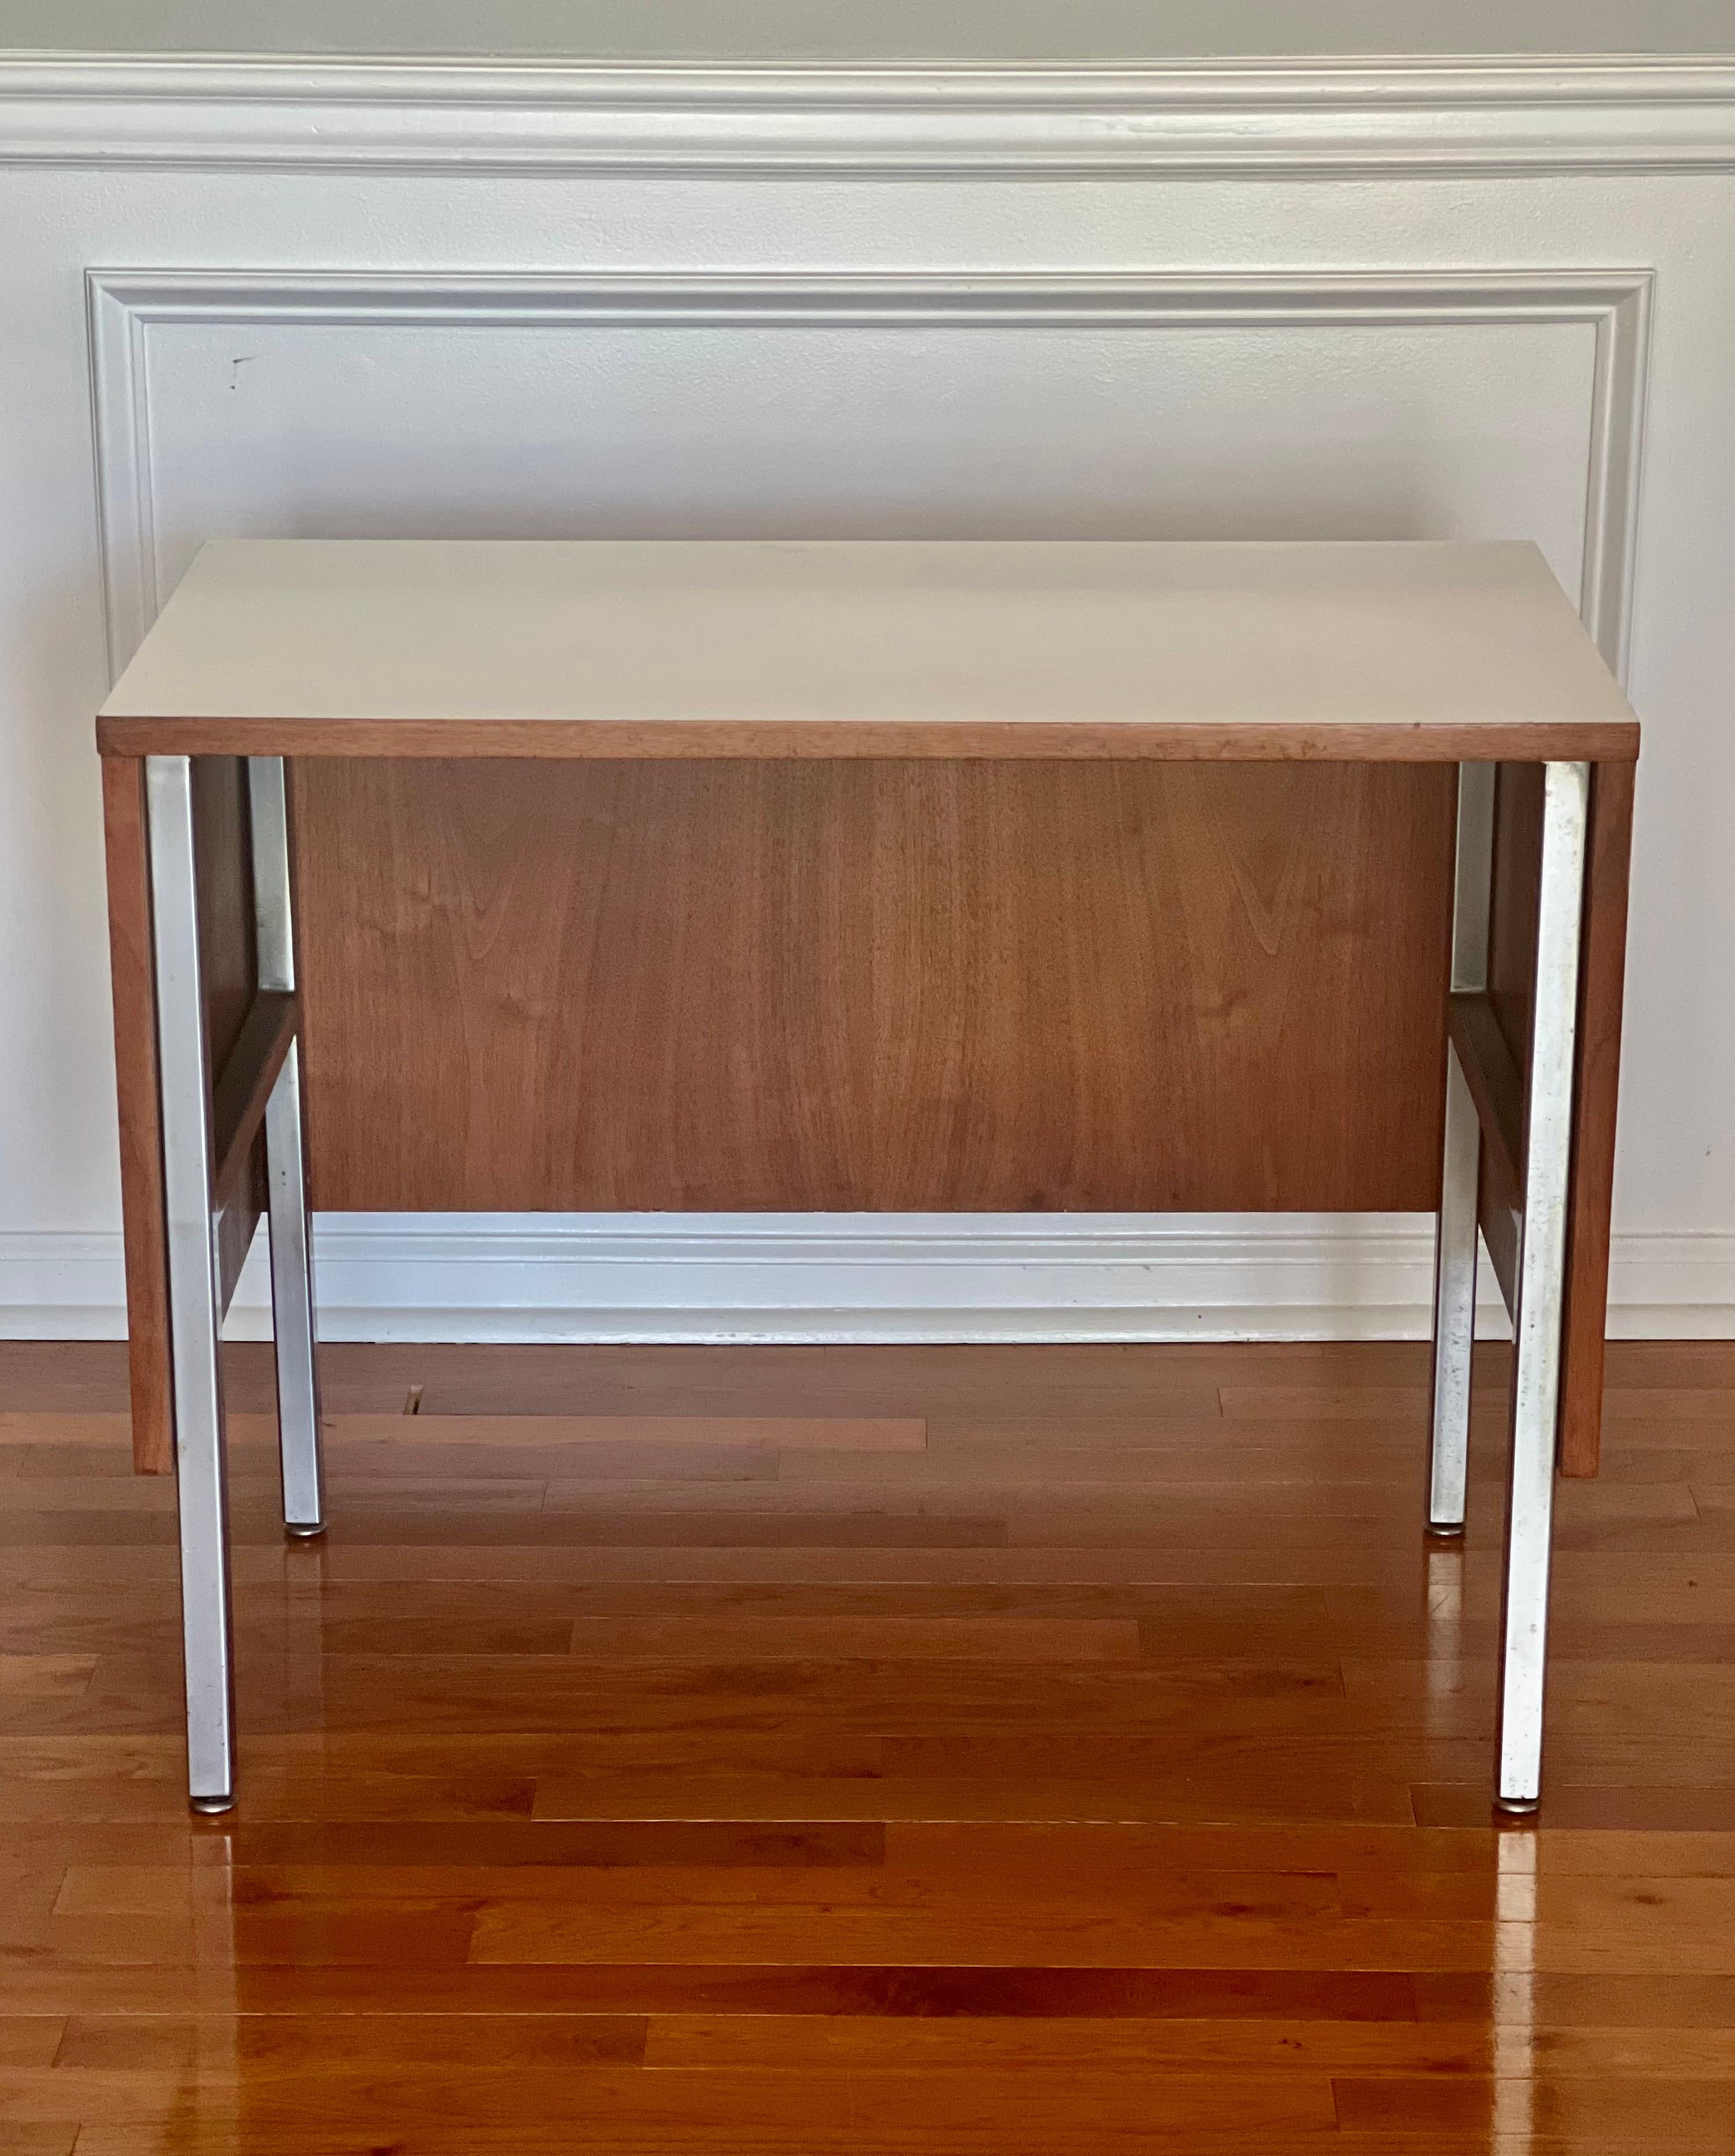 George Nelson for Herman Miller side table, work table or small console desk.

Great as a side/work table in a home office for printer, files, etc as a useful auxiliary piece to your main desk to ease workflow. Also perfect as a side table or small